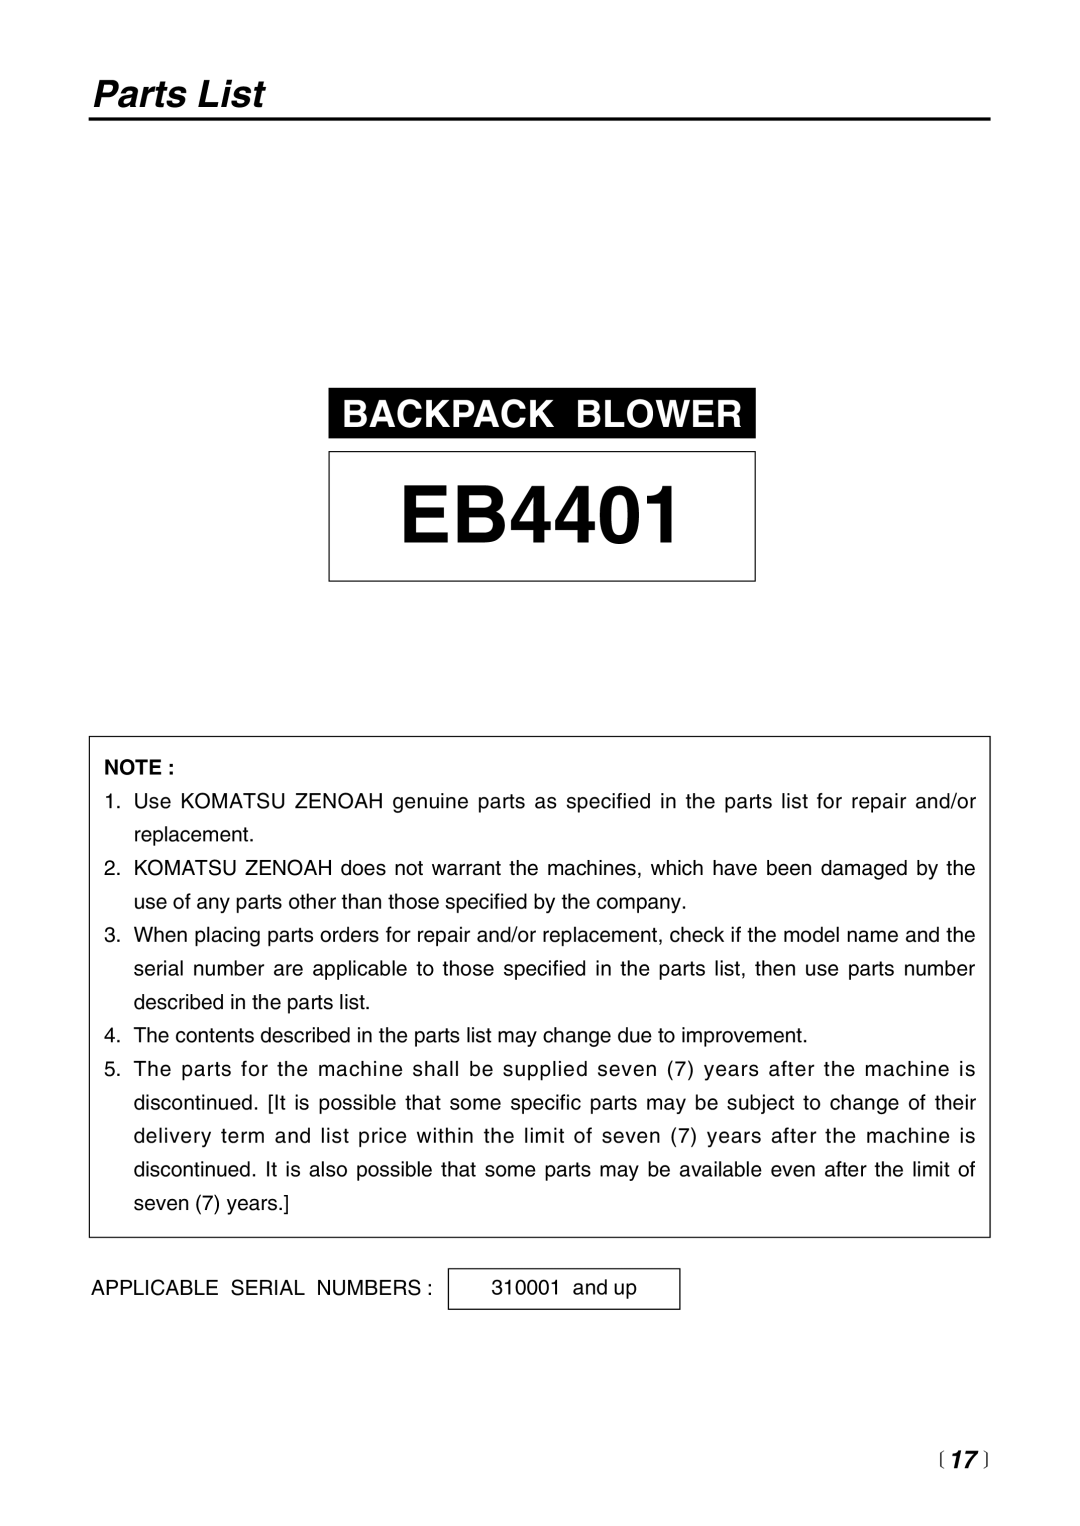 RedMax EB4401 manual Parts List, Backpack Blower, 17  